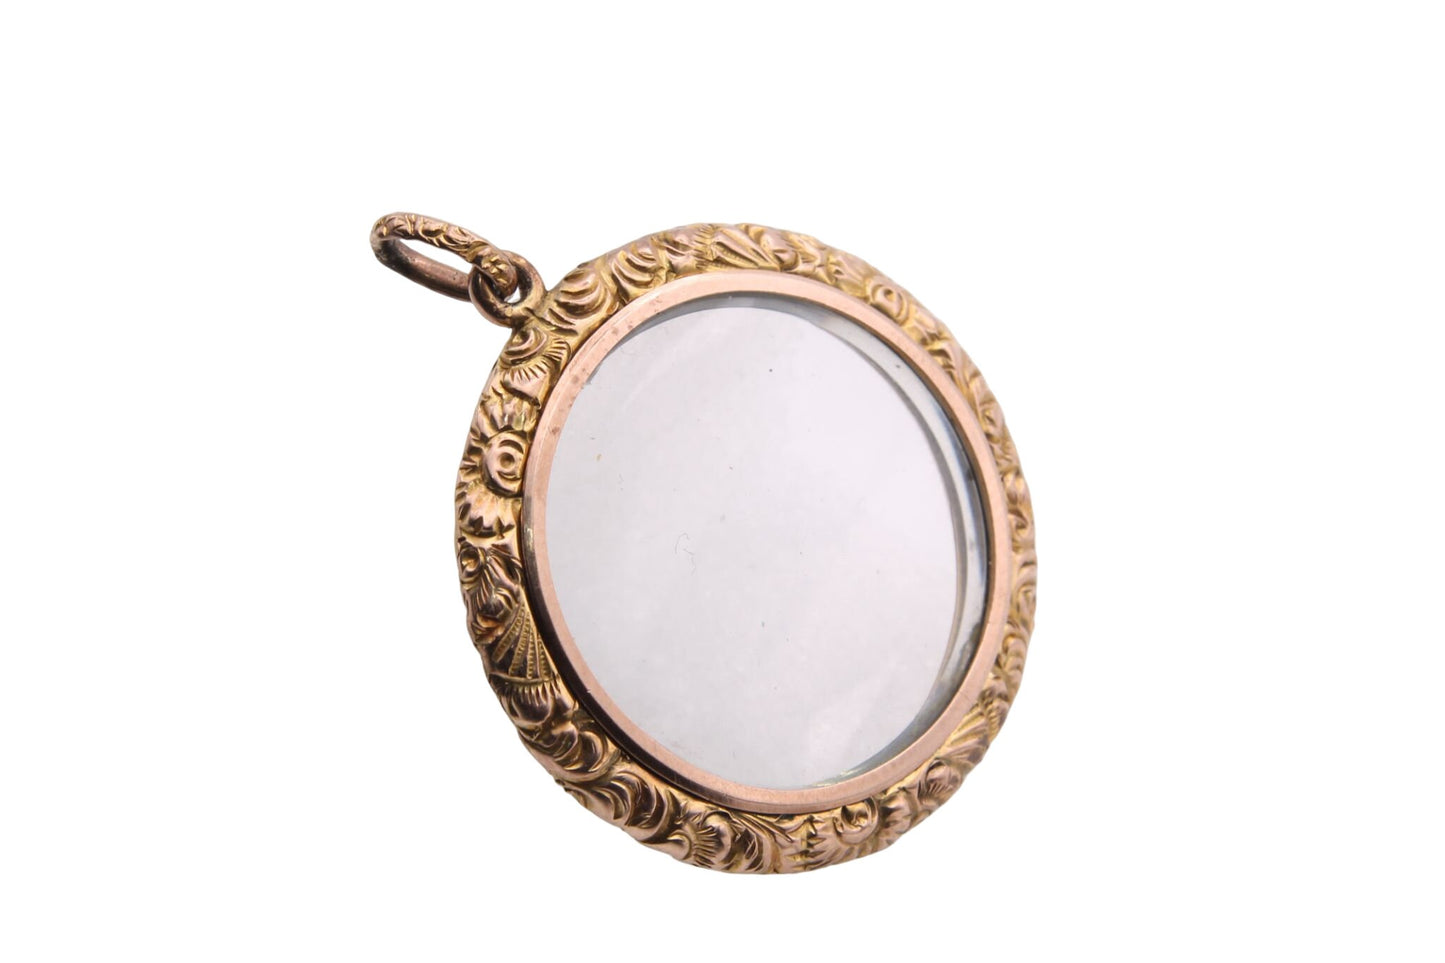 large-antique-chased-9ct-gold-glass-pendant-locket